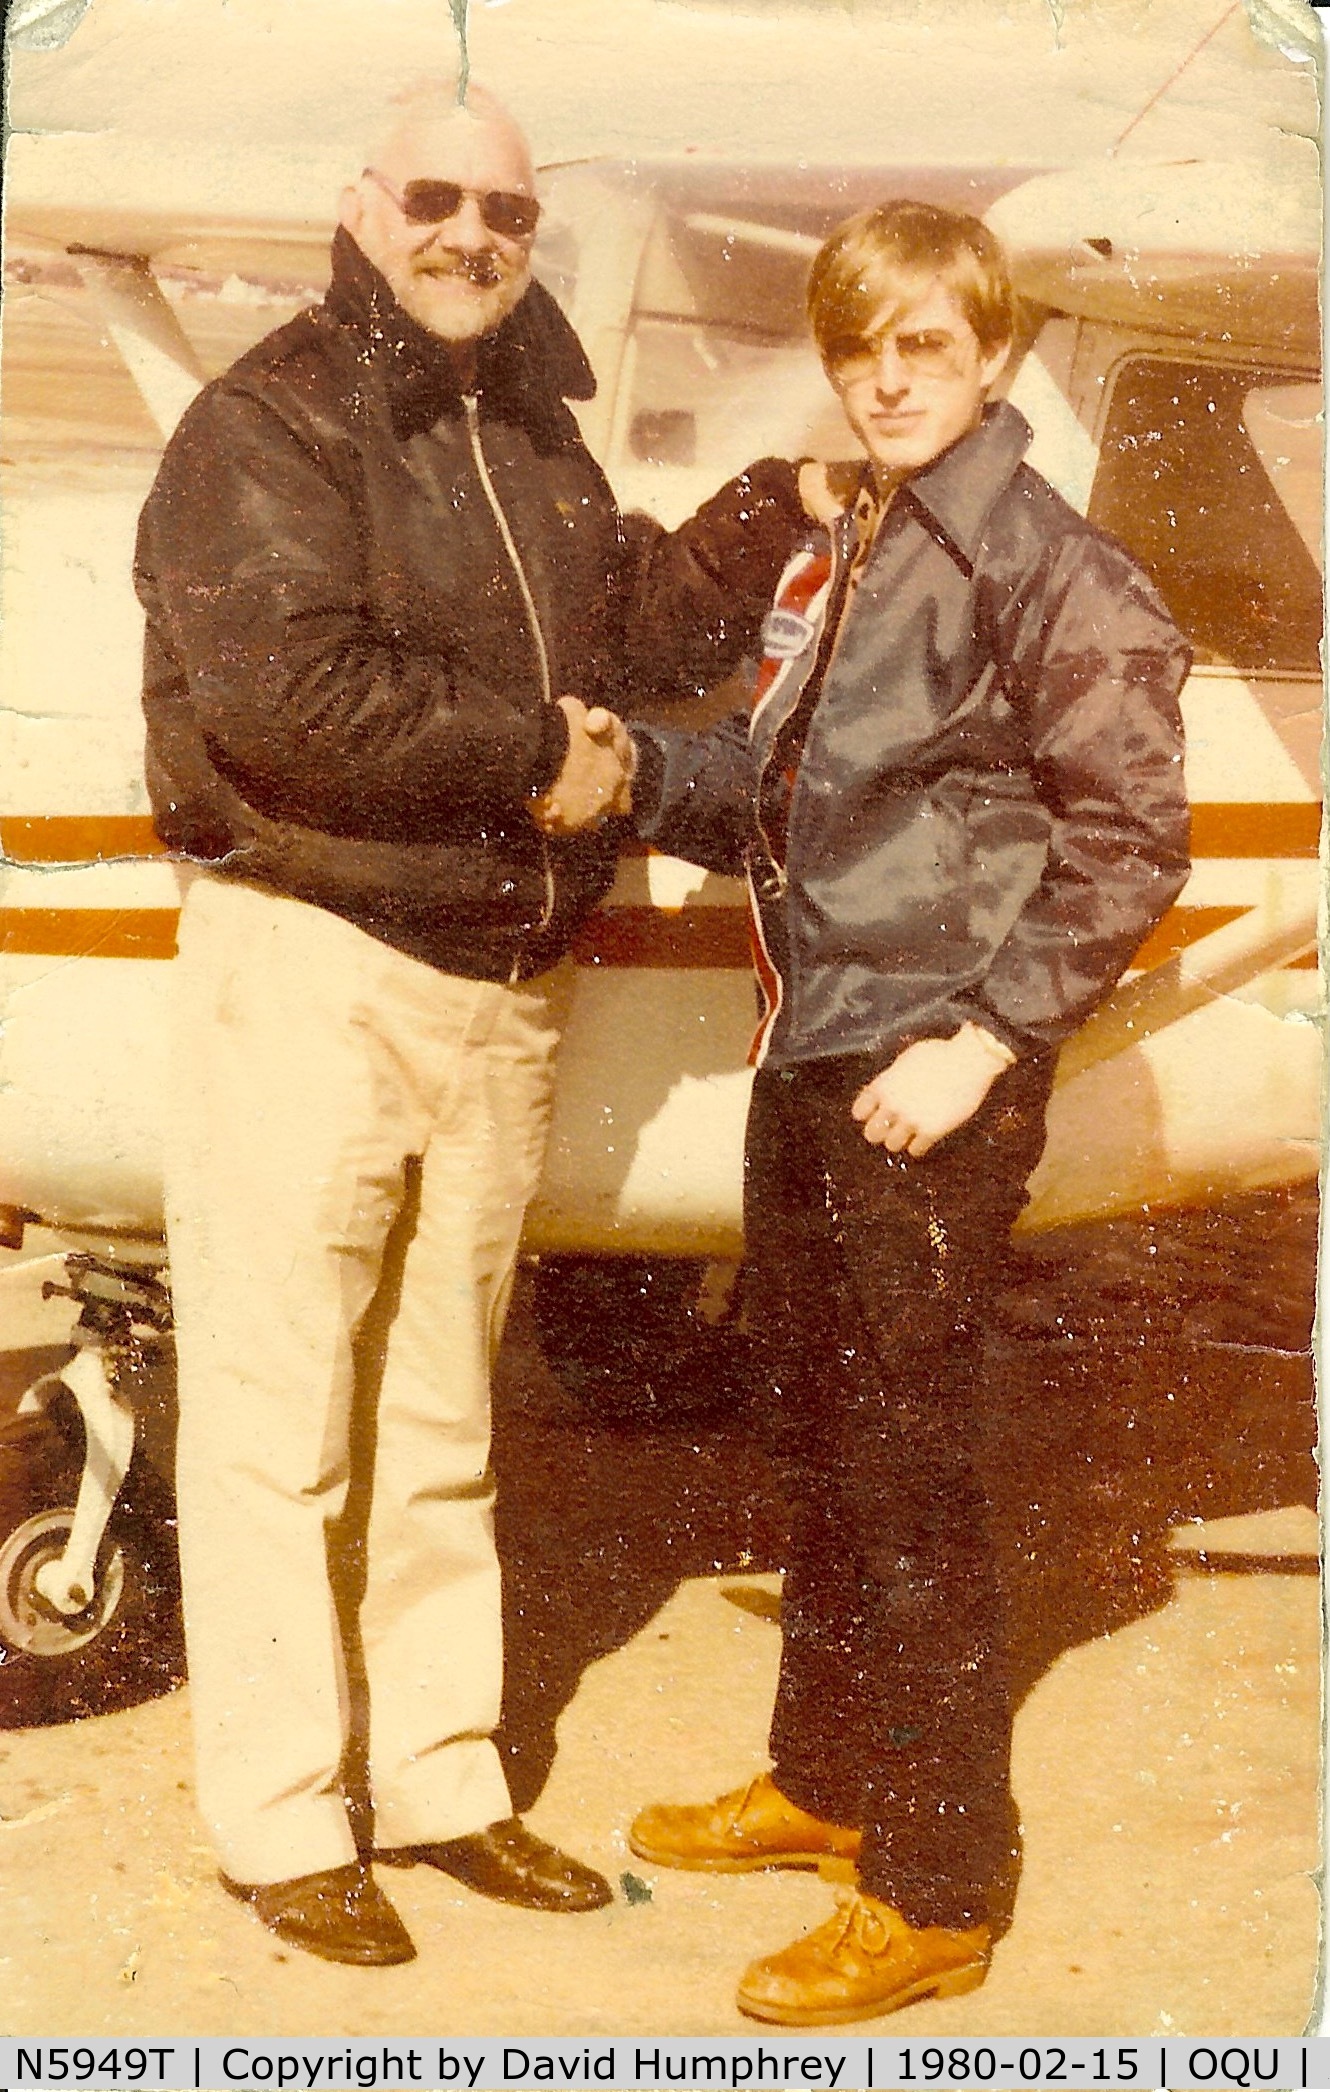 N5949T, 1964 Cessna 150D C/N 15060649, Soloing in N5949T on my 16th birthday in Rhode Island in 1980.  The plane and I are the same age.  I believe the '64 and '65 models were the only years that had both the straight tail and the rear window.